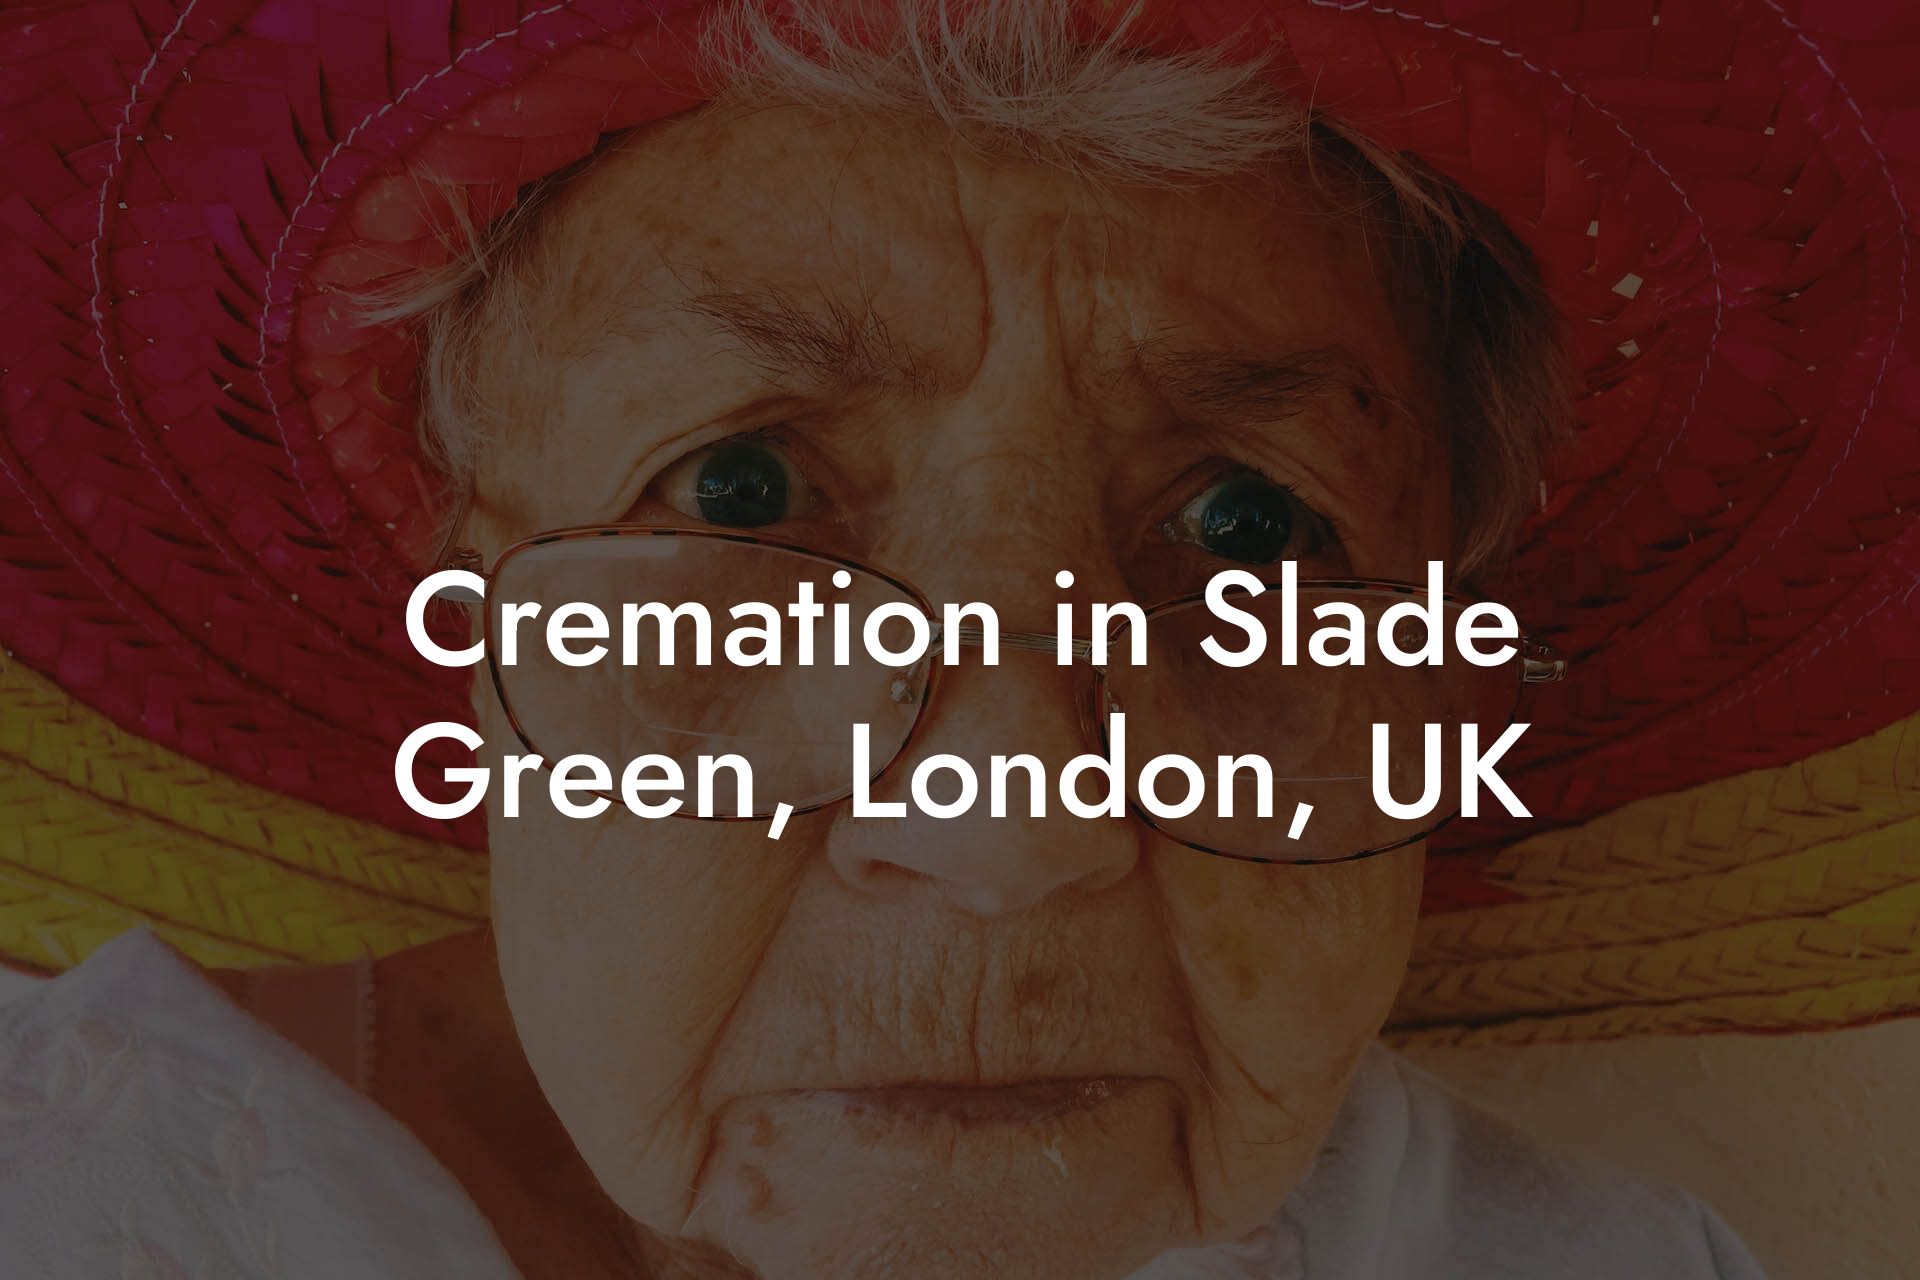 Cremation in Slade Green, London, UK